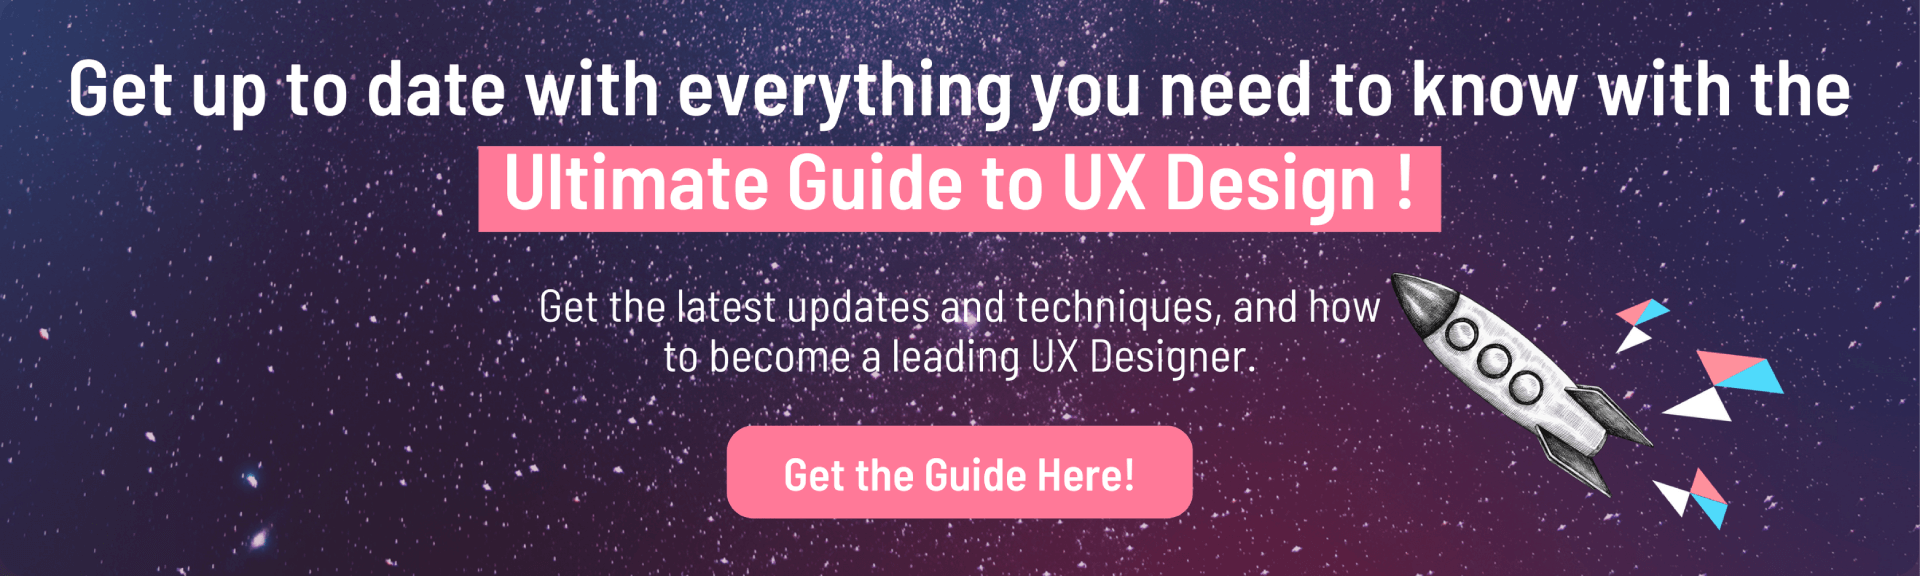 ultimate_guide_ux_1